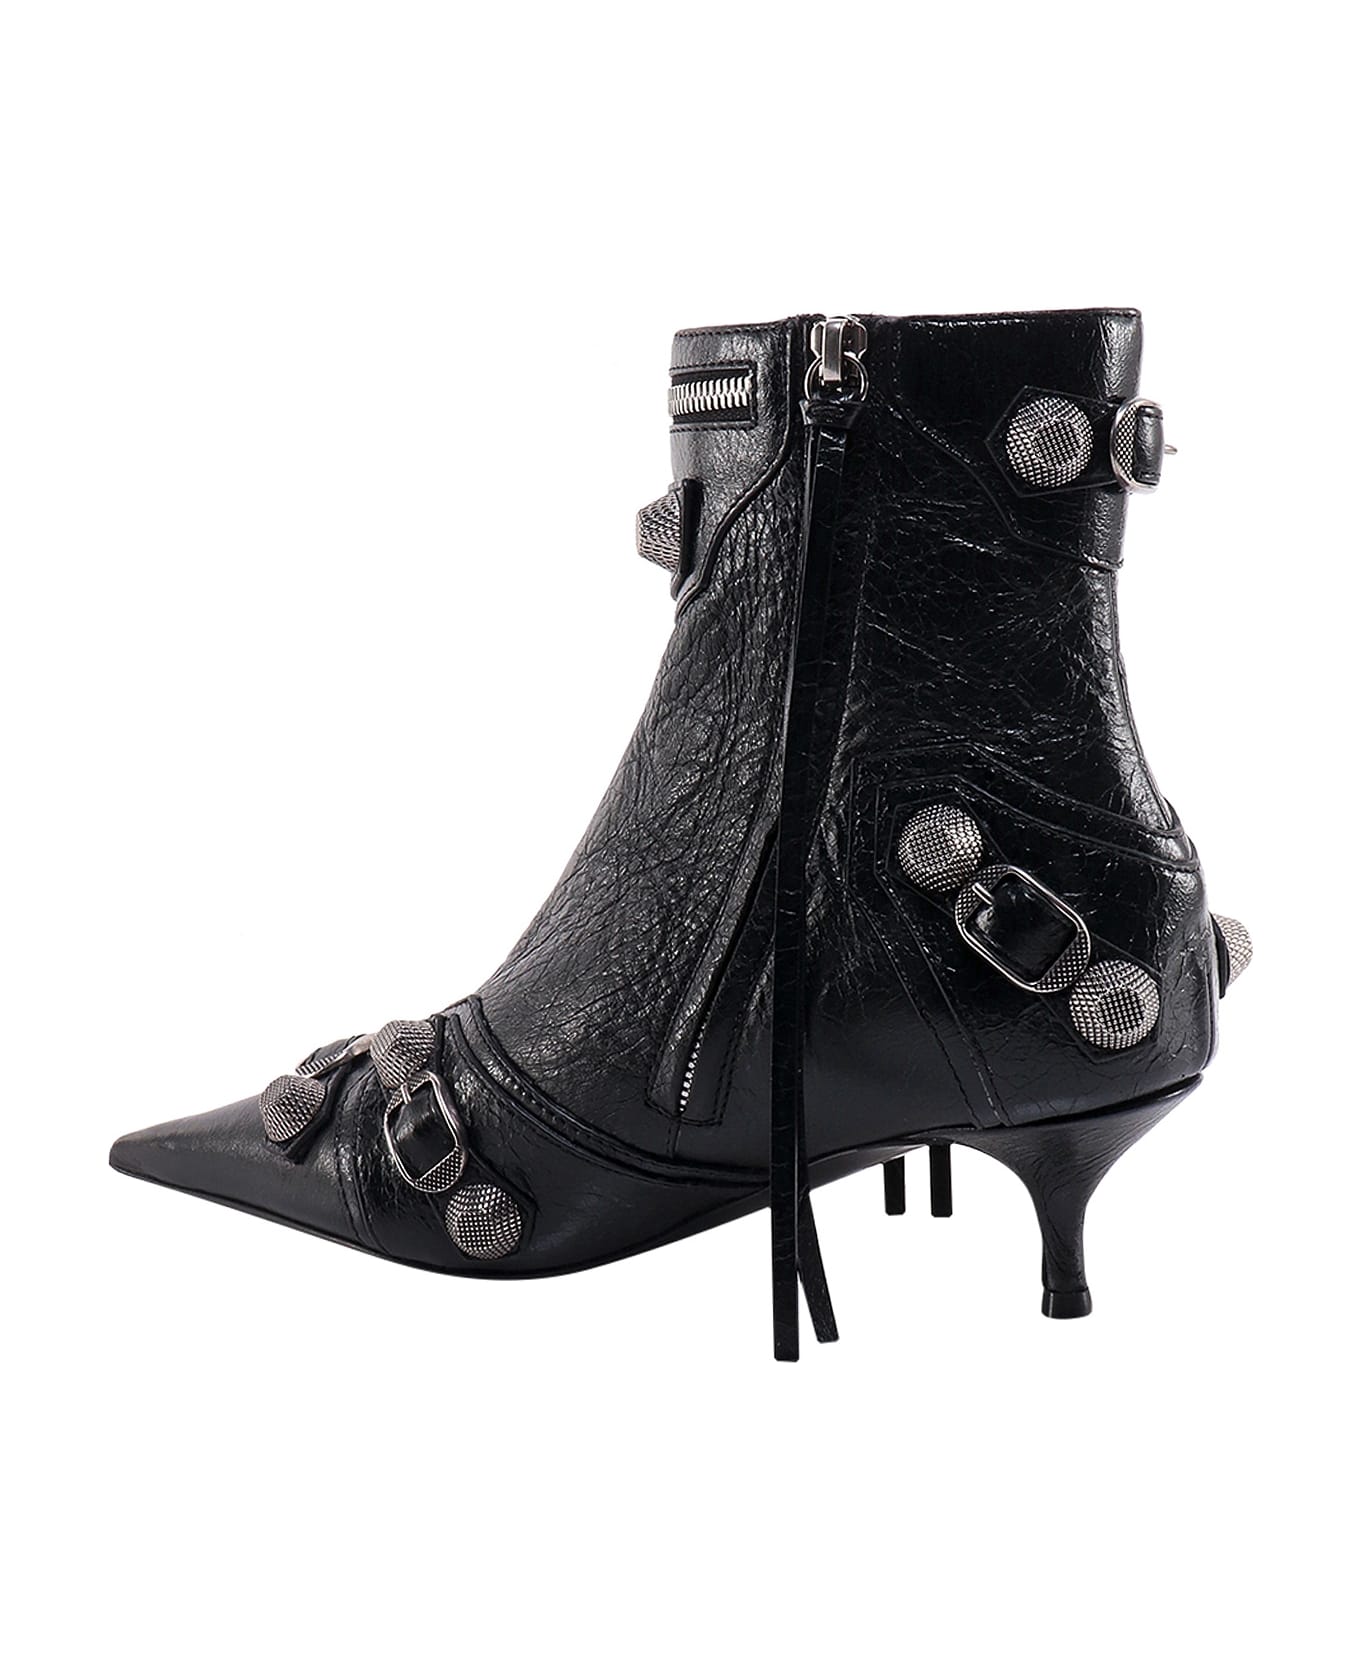 Balenciaga Low Heels Ankle Boots In Black Leather - Black